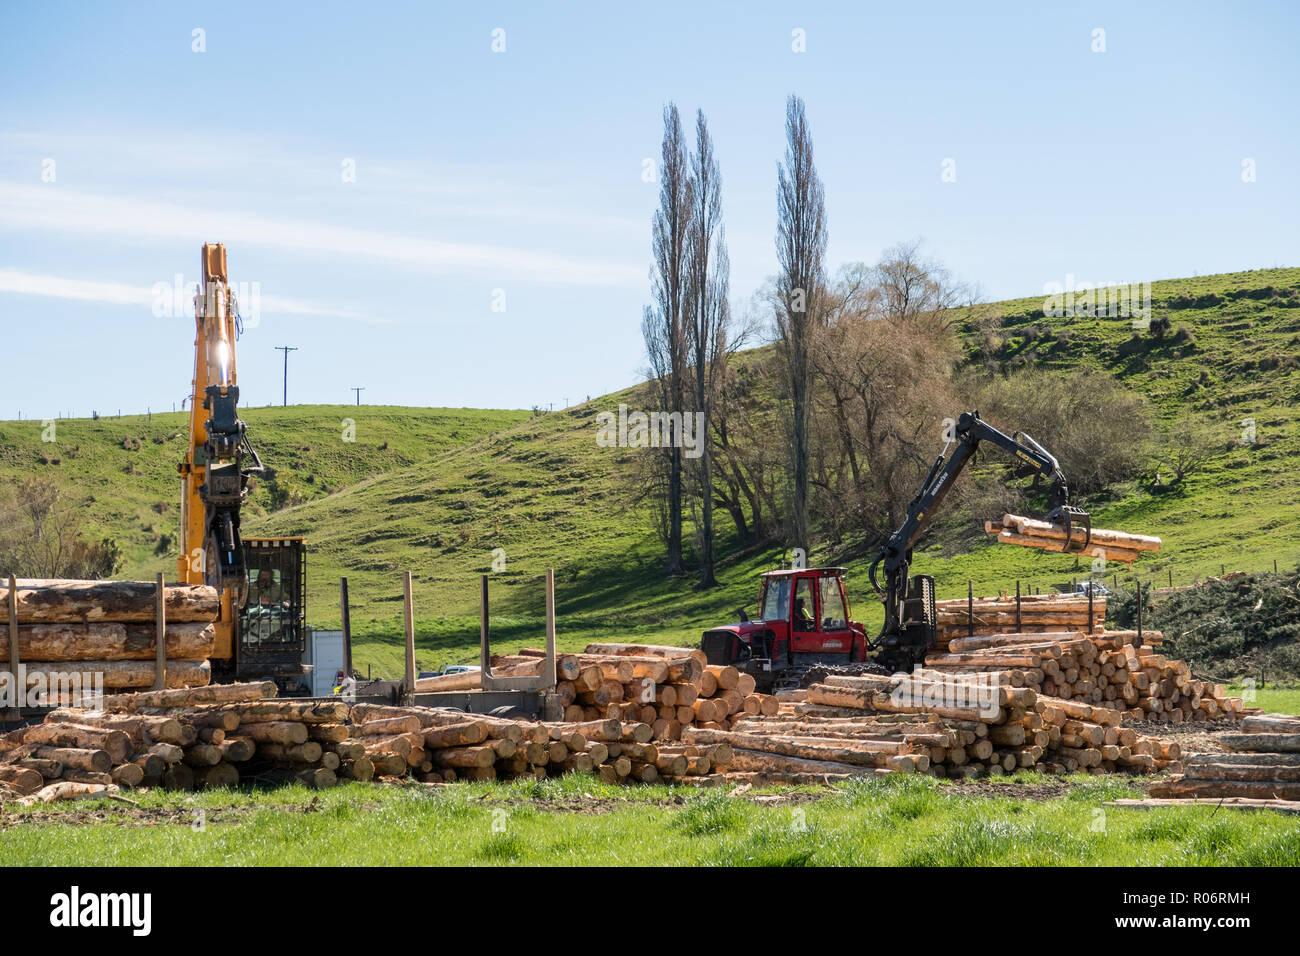 Opuha, South Canterbury, New Zealand, September 14 2018: A log truck being loaded with pine logs at a logging site for export Stock Photo